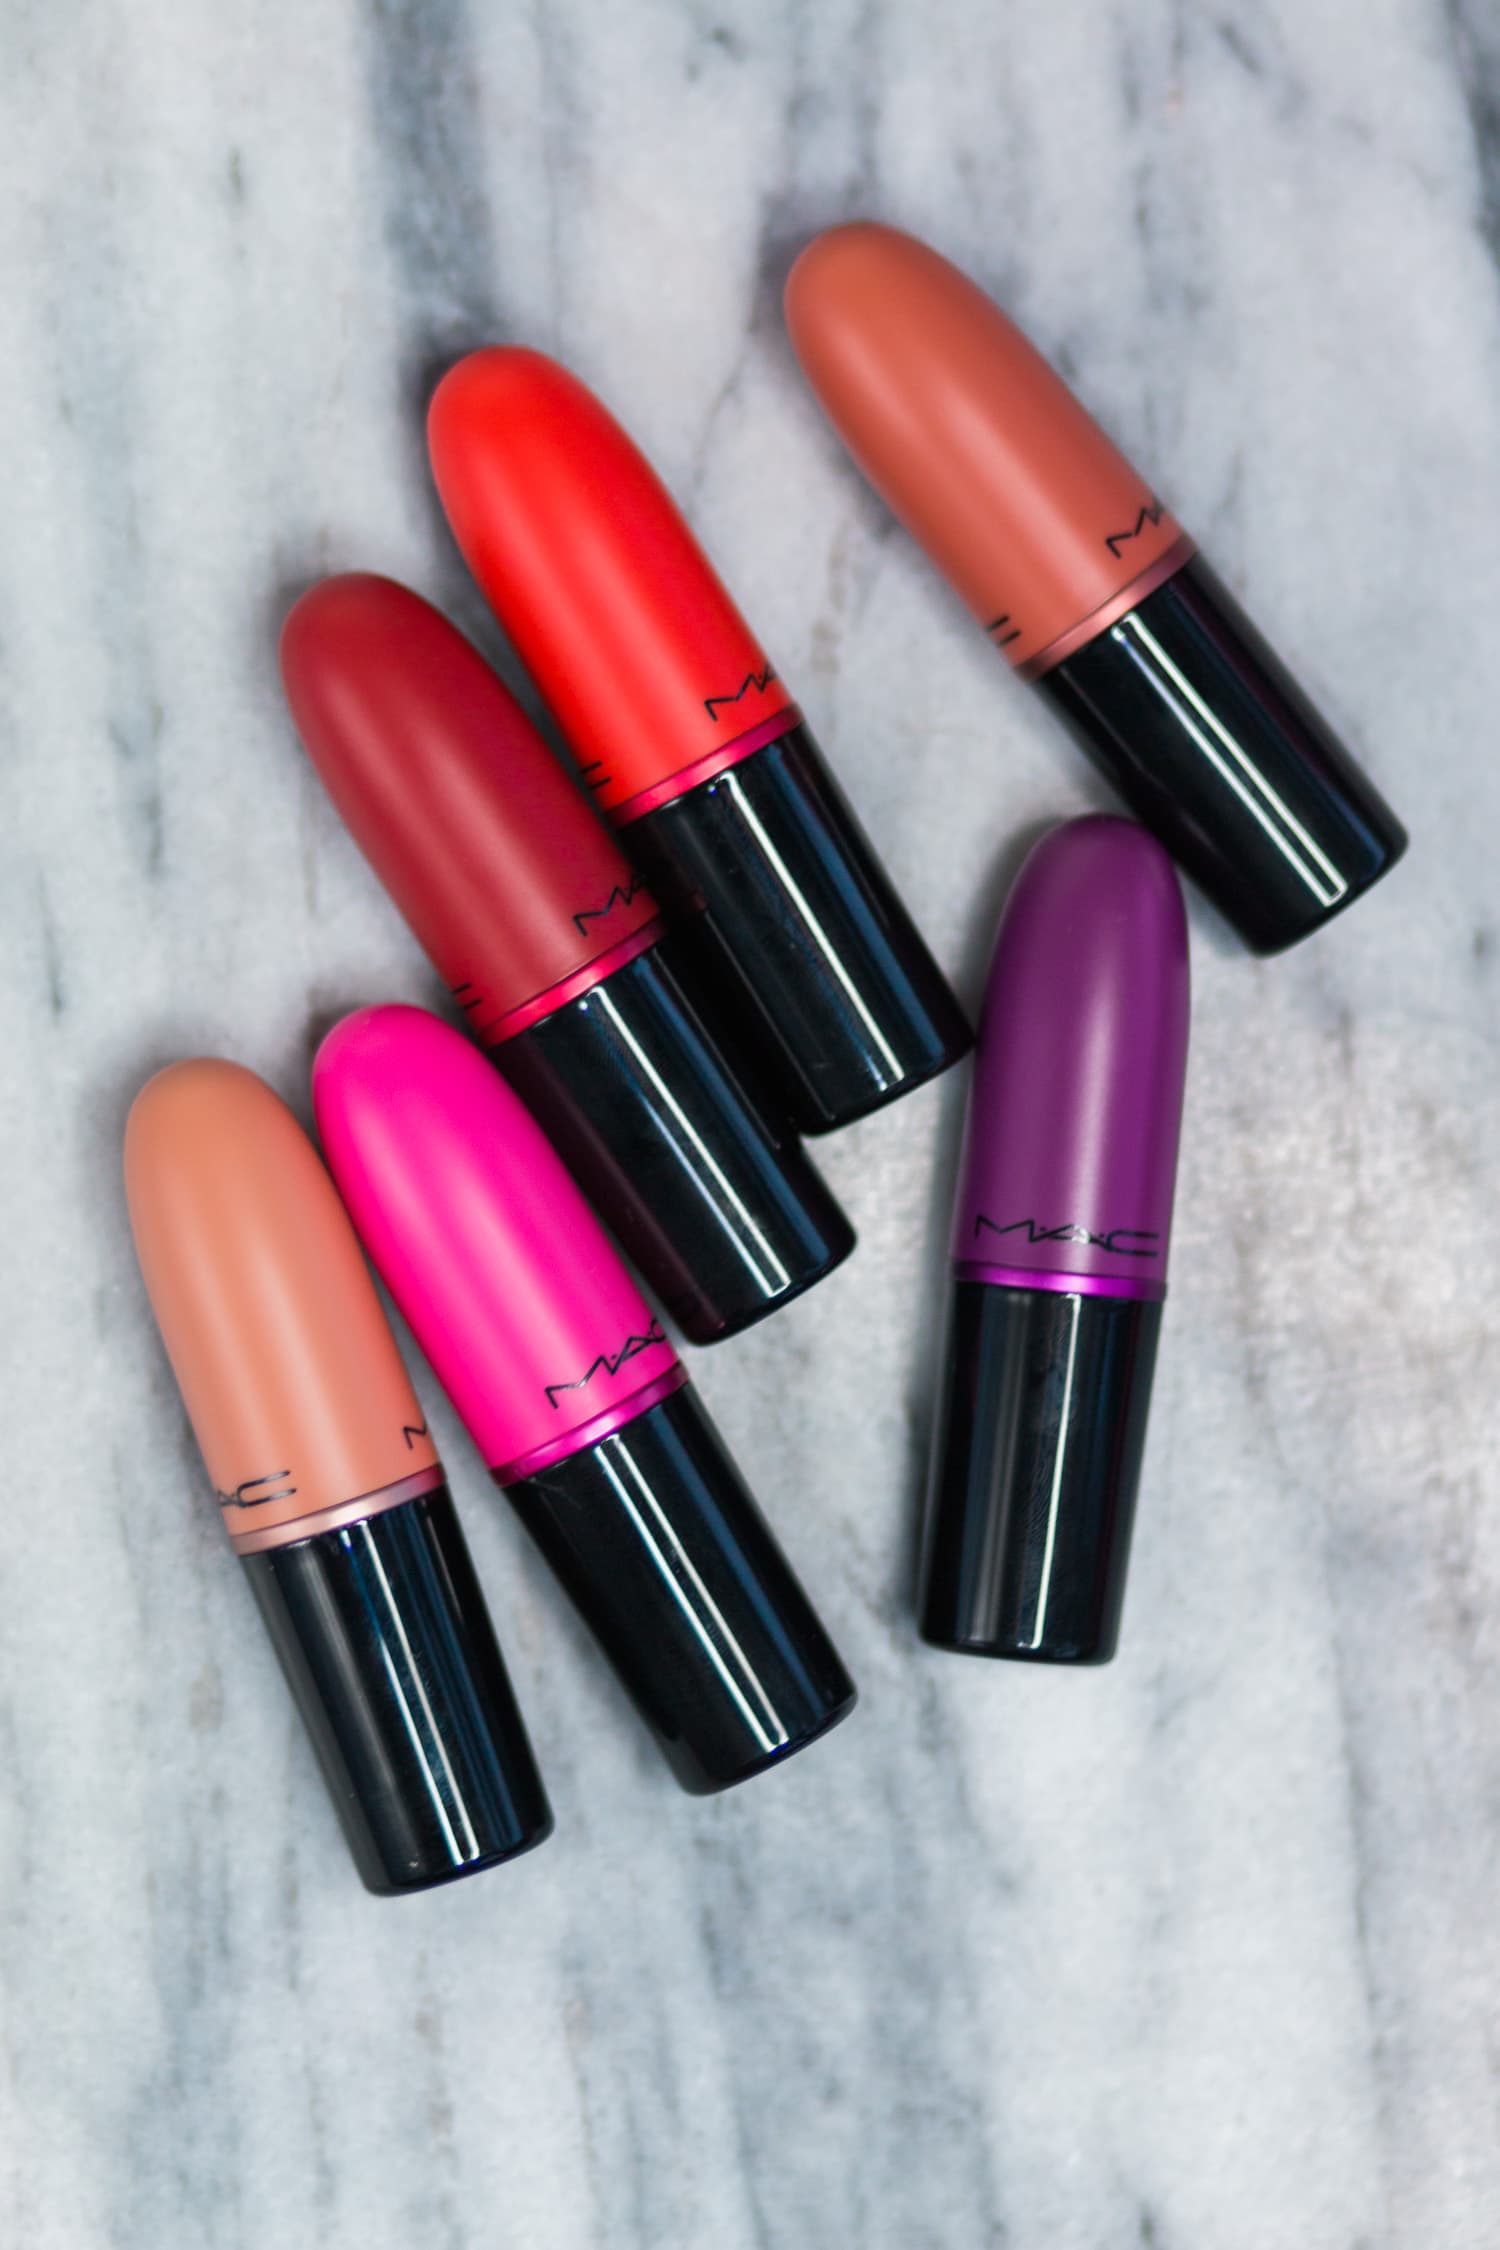 MAC Shadescents lipsticks in Candy Yum Yum, Lady Danger, Heroine, Velvet Teddy, Creme D'Nude, and Ruby Woo by Orlando, Florida beauty blogger Ashley Brooke Nicholas